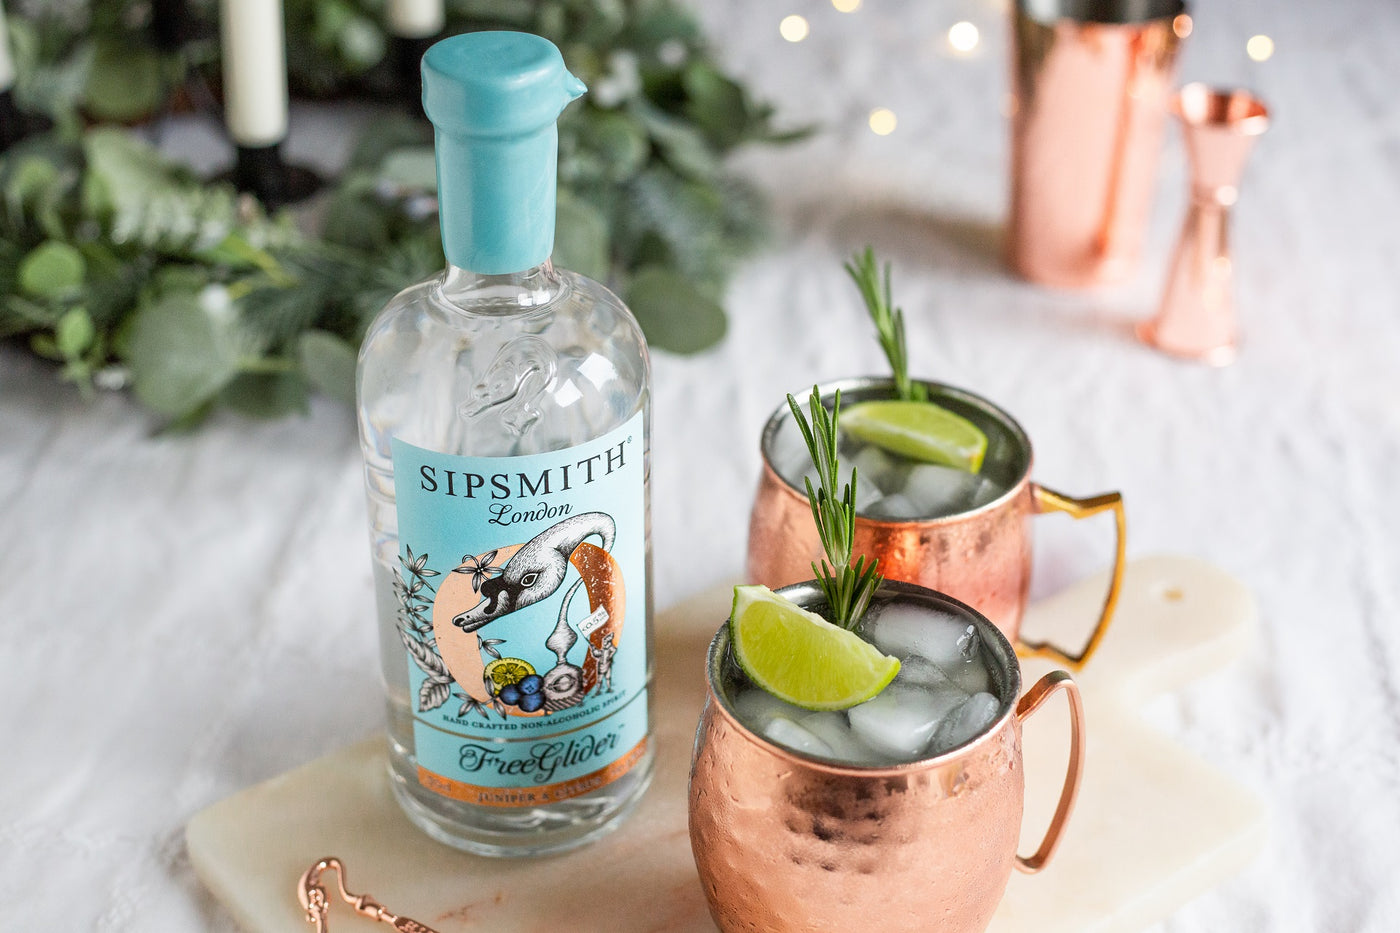 Sipsmith FreeGlider Alcohol-Free Gin